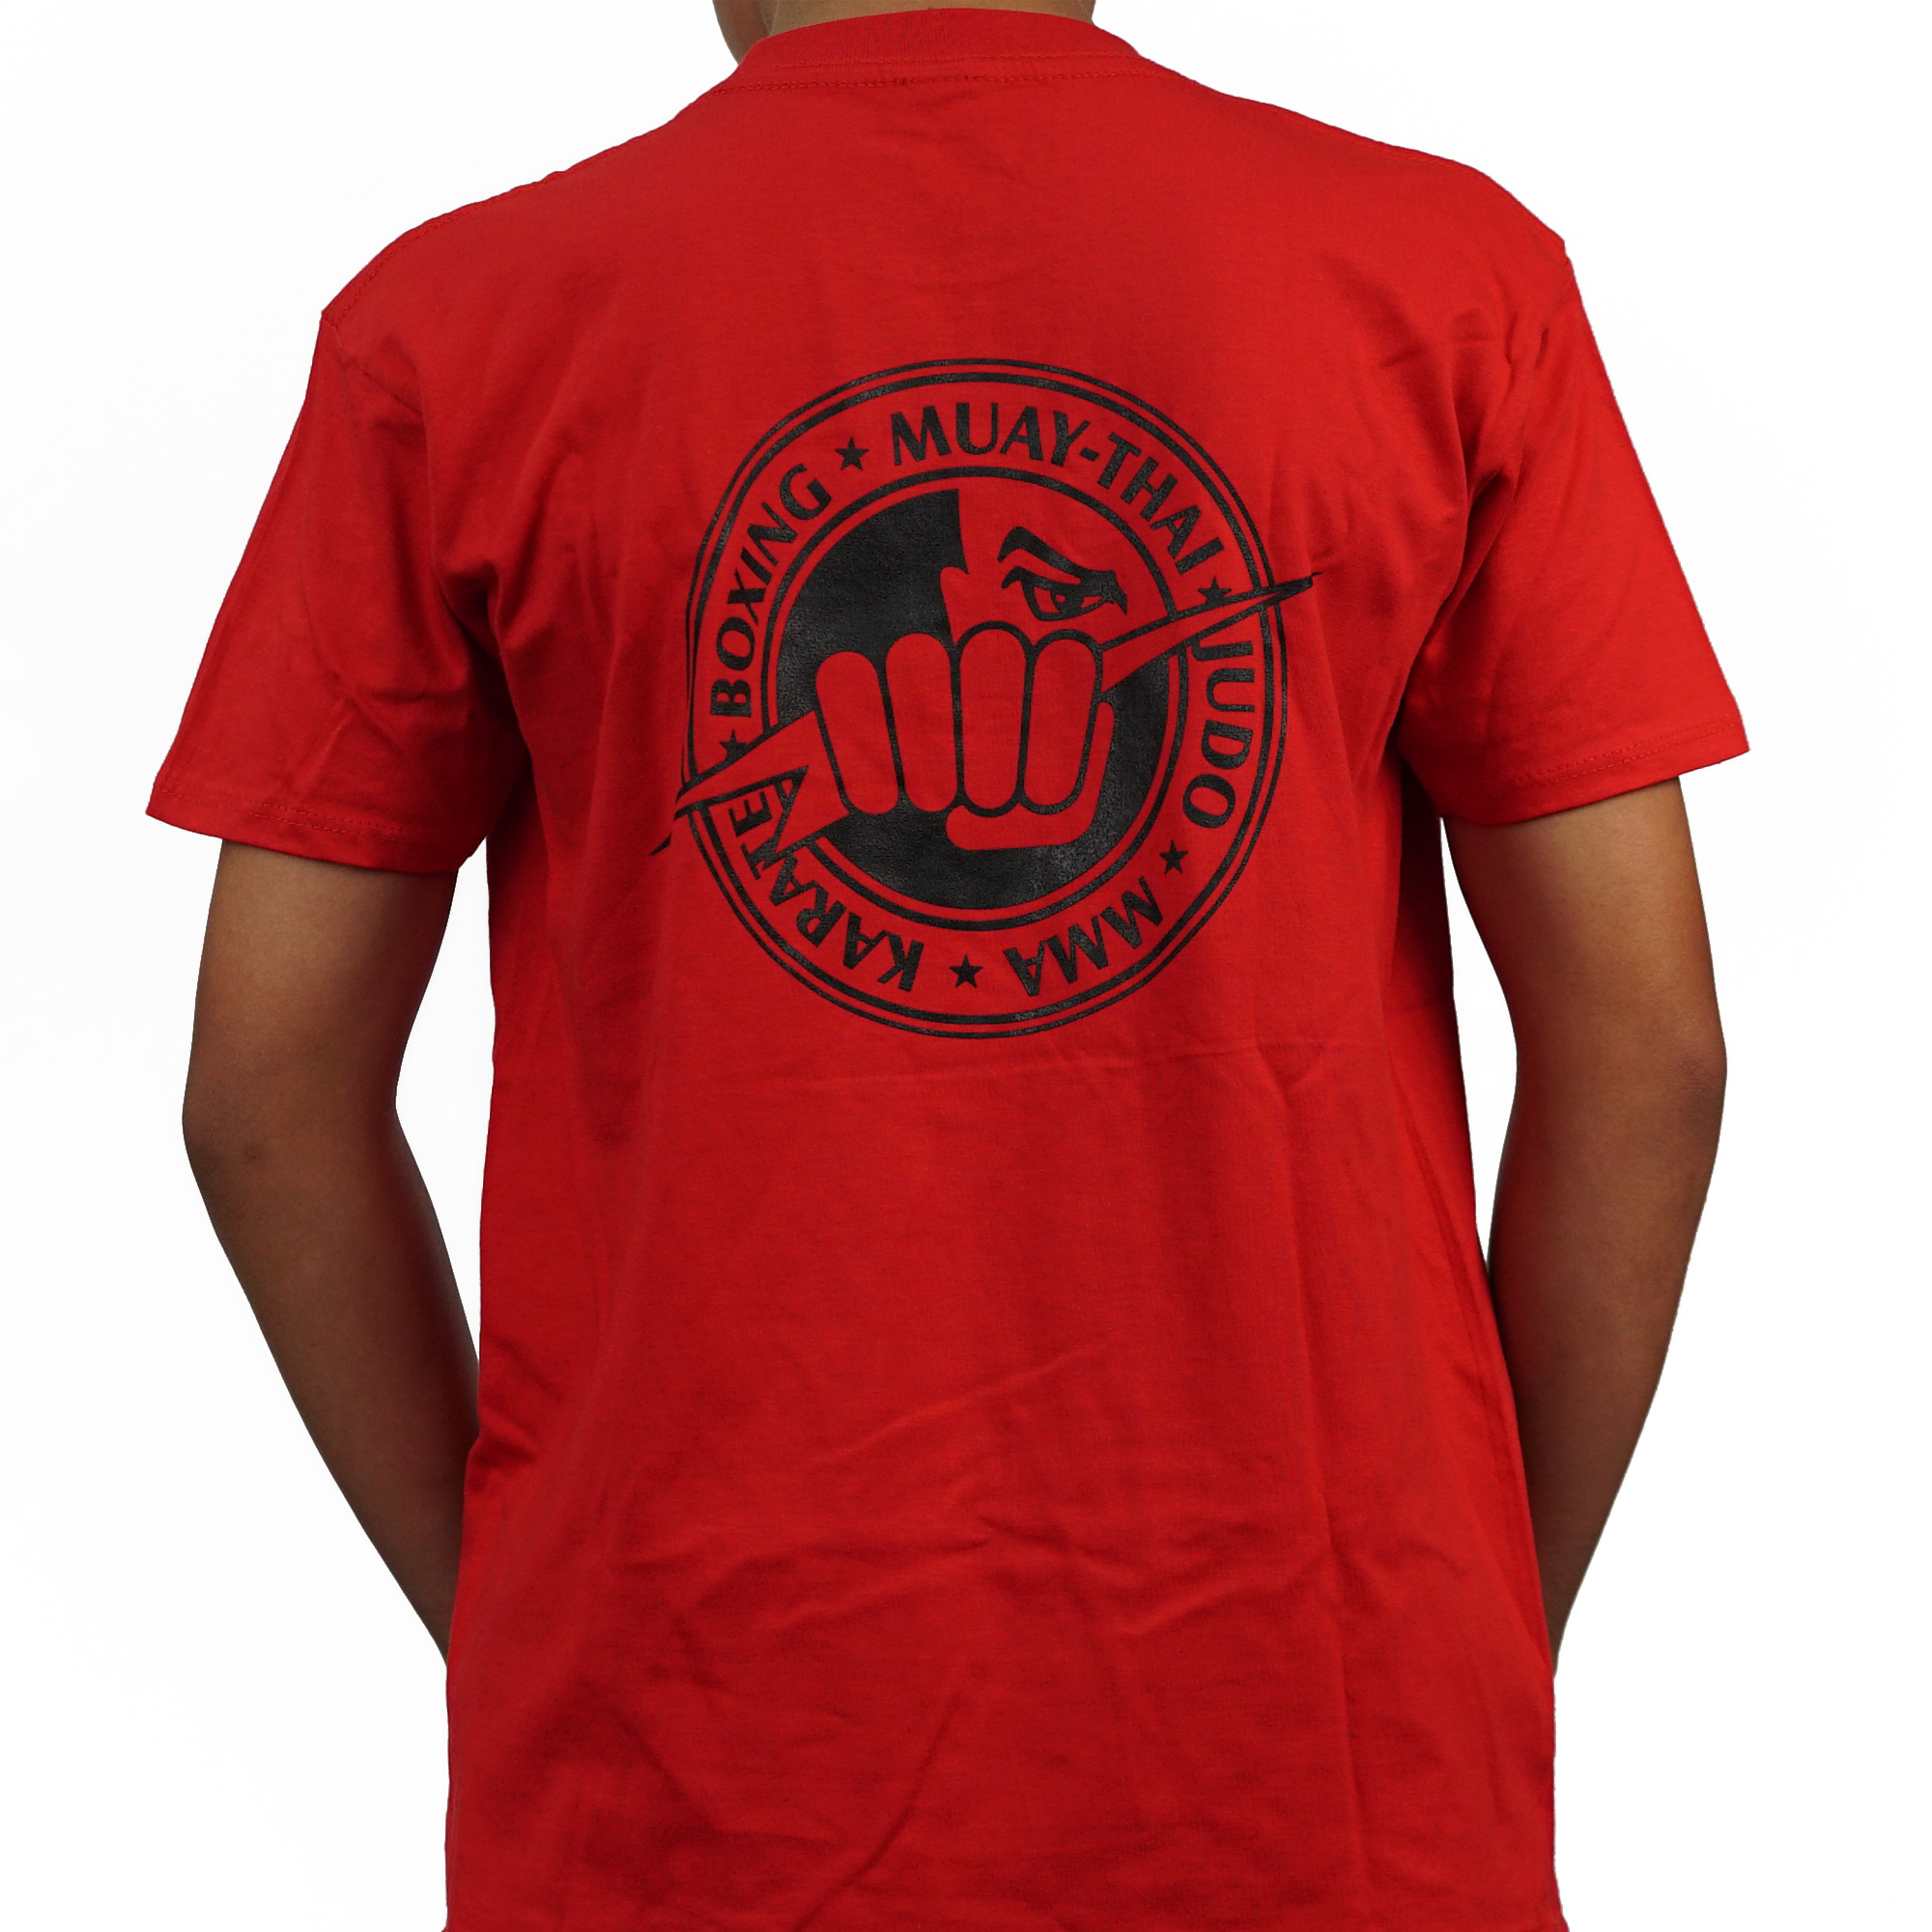 black t shirt with red writing